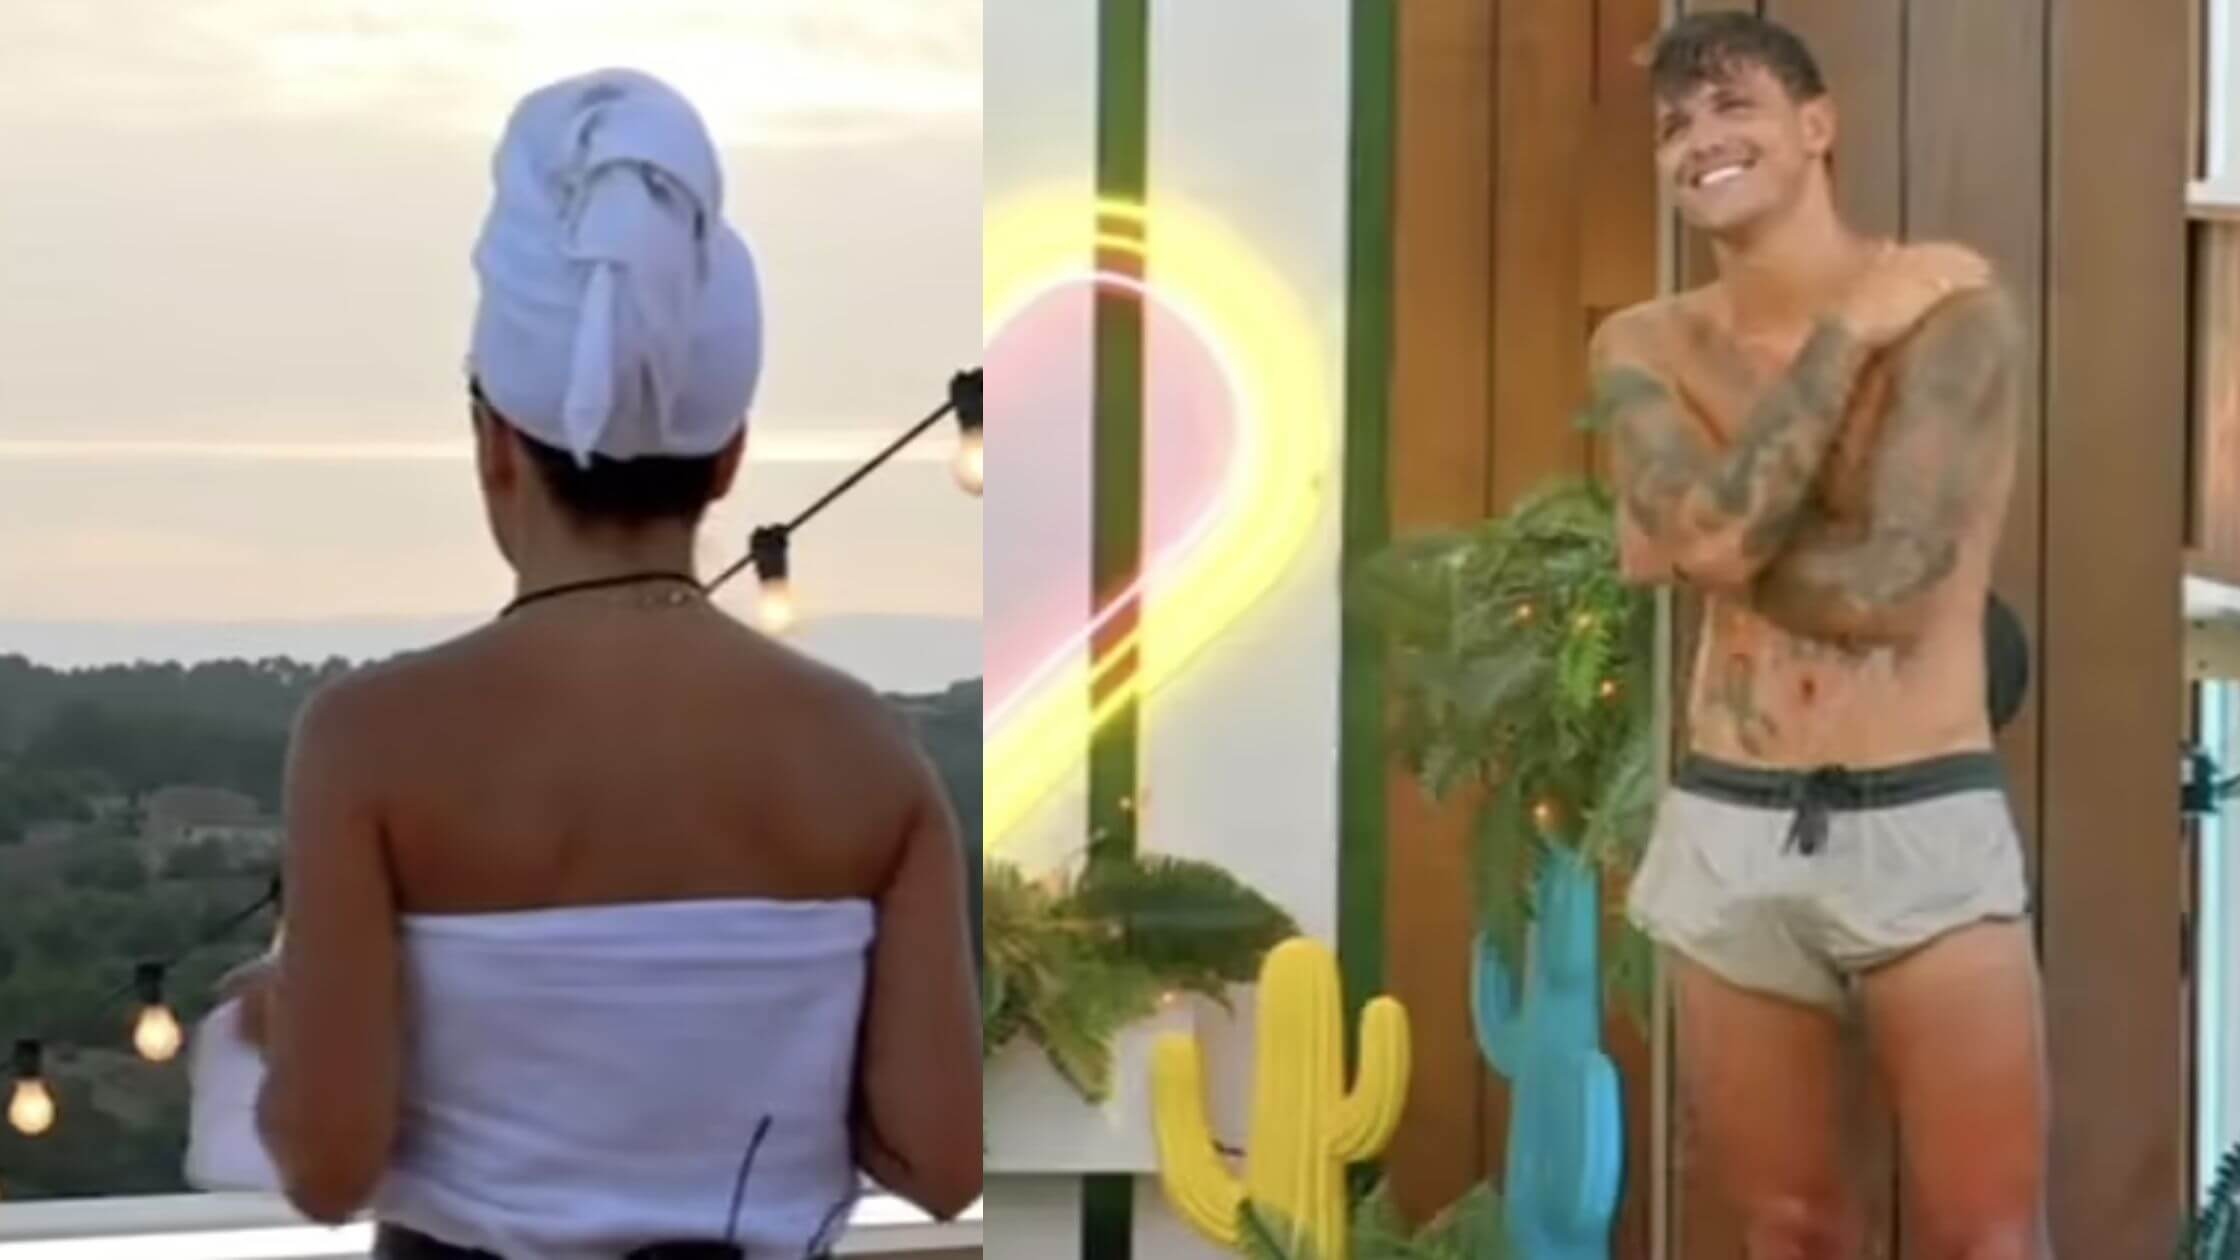 Love Island 2022: Gemma Owen Leaves Viewers Aghast After flashing breasts At Semi-naked Luca Bish